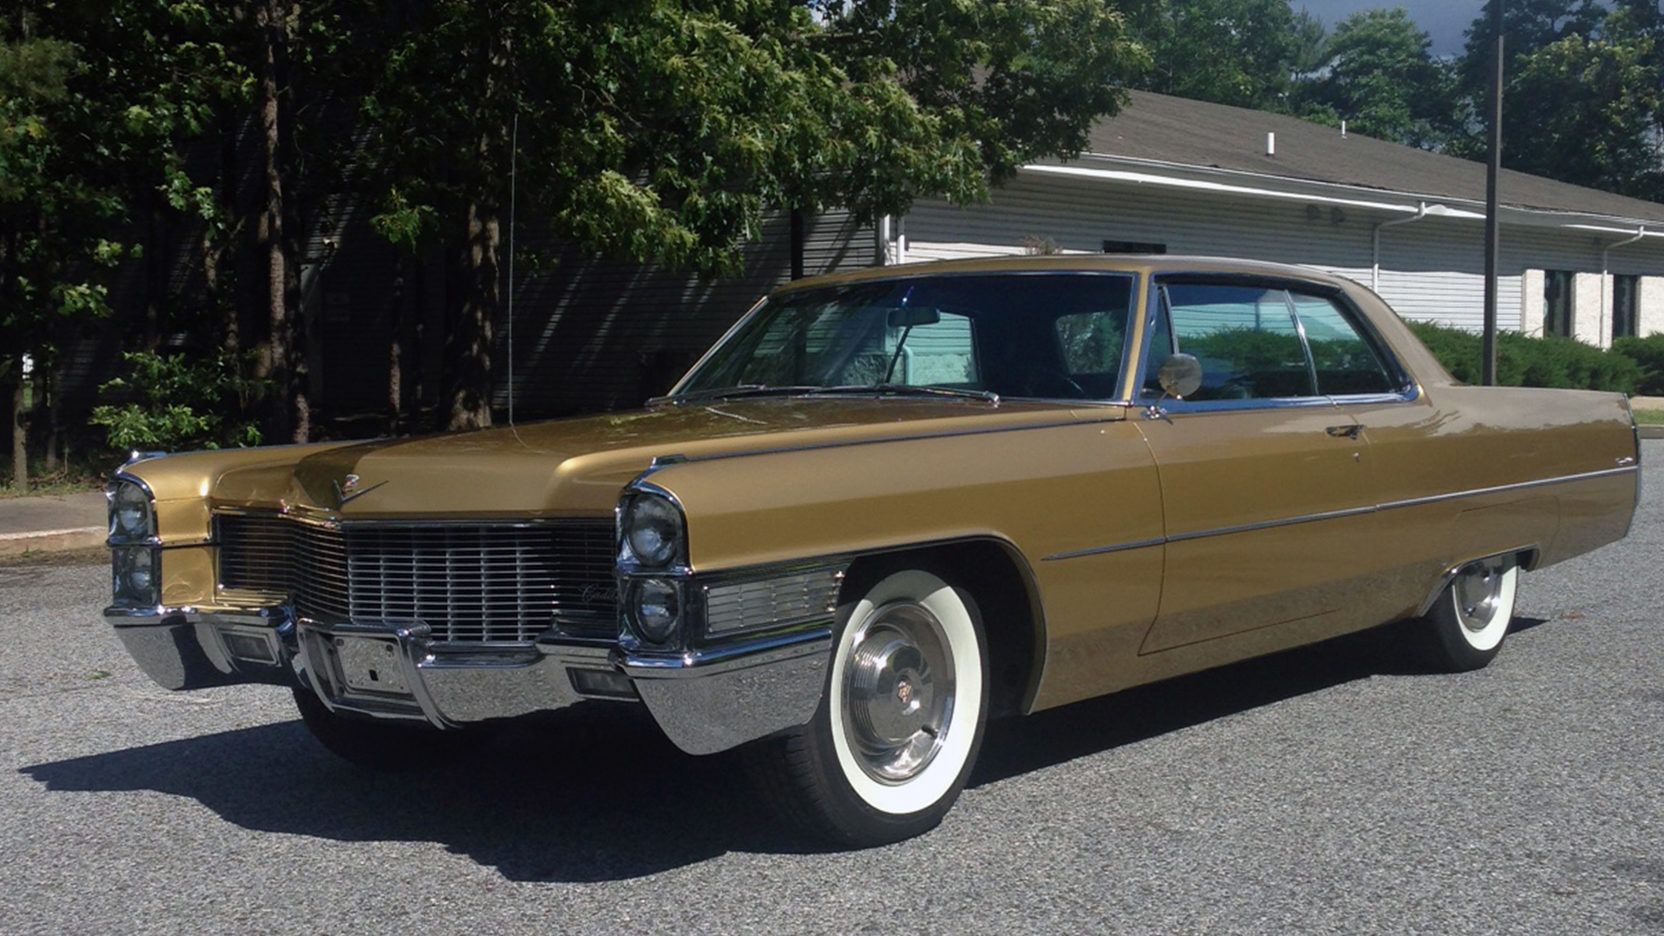 1965 cadillac coupe deville, brown, parked outside